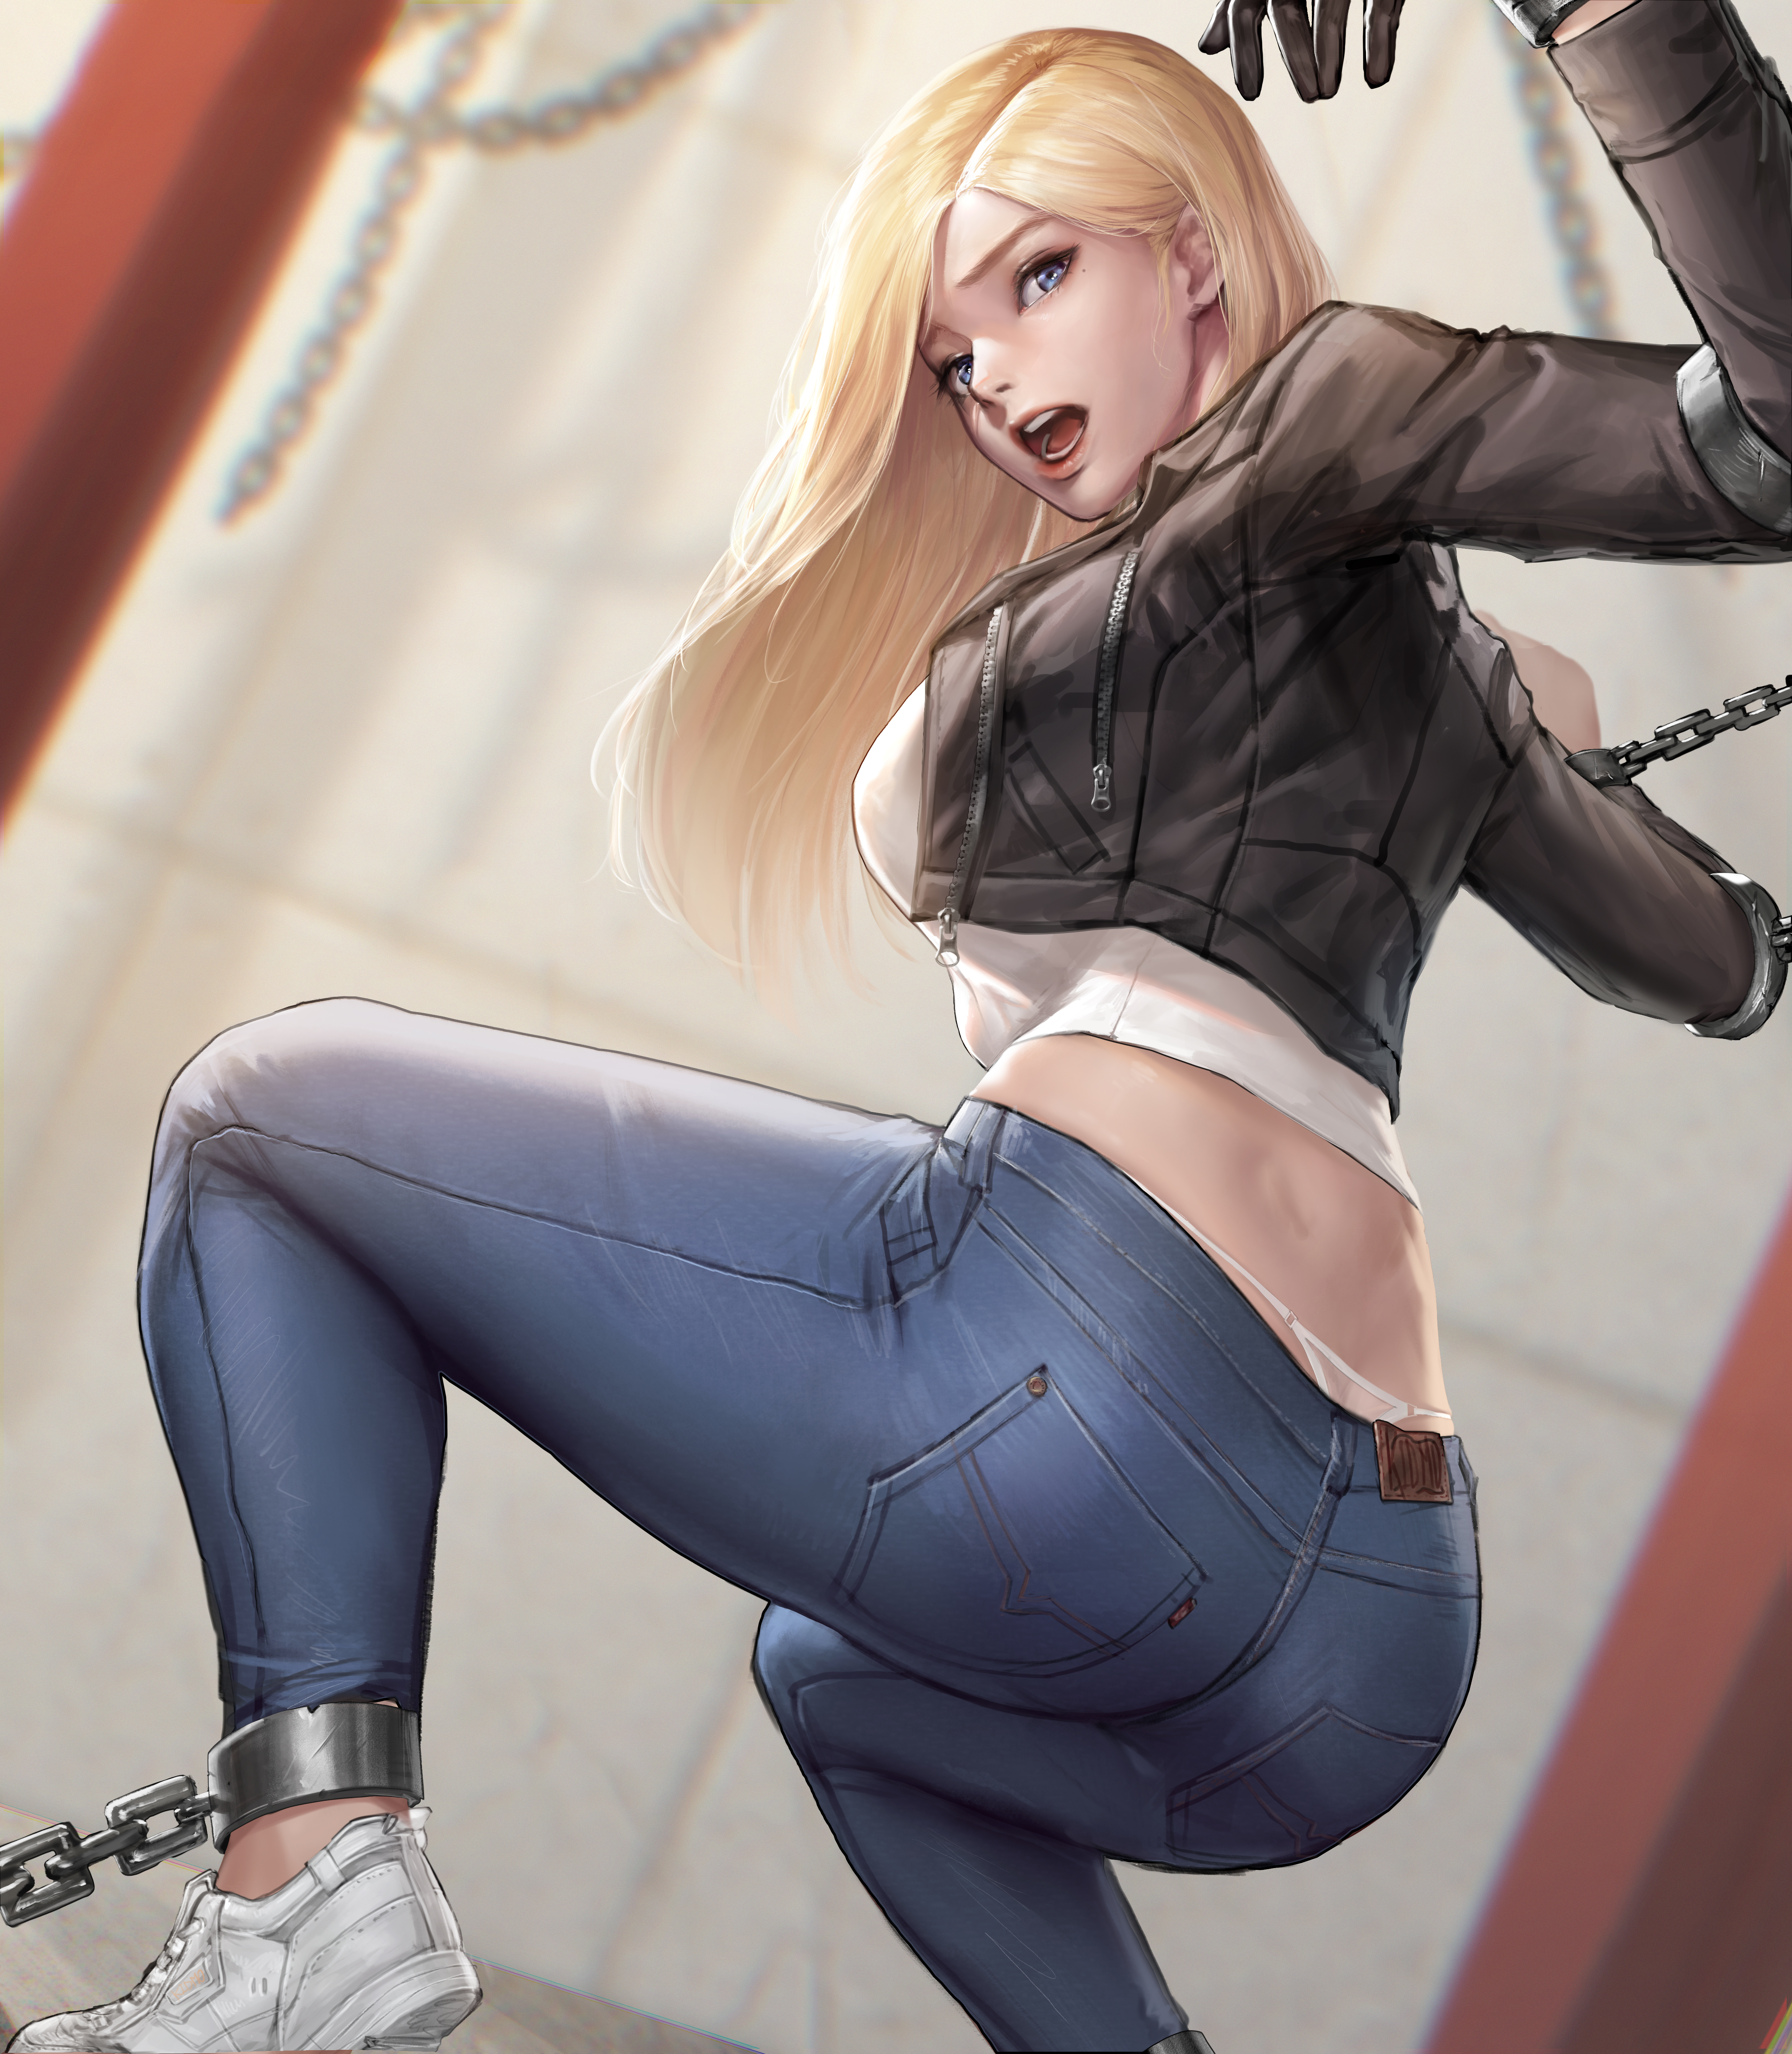 General 4684x5368 anime drawing artwork digital art blonde chain on foot chain-link chains jacket white sneakers jeans skinny jeans white tops gloves blue eyes Kidmo ass rear view women whale tails bound